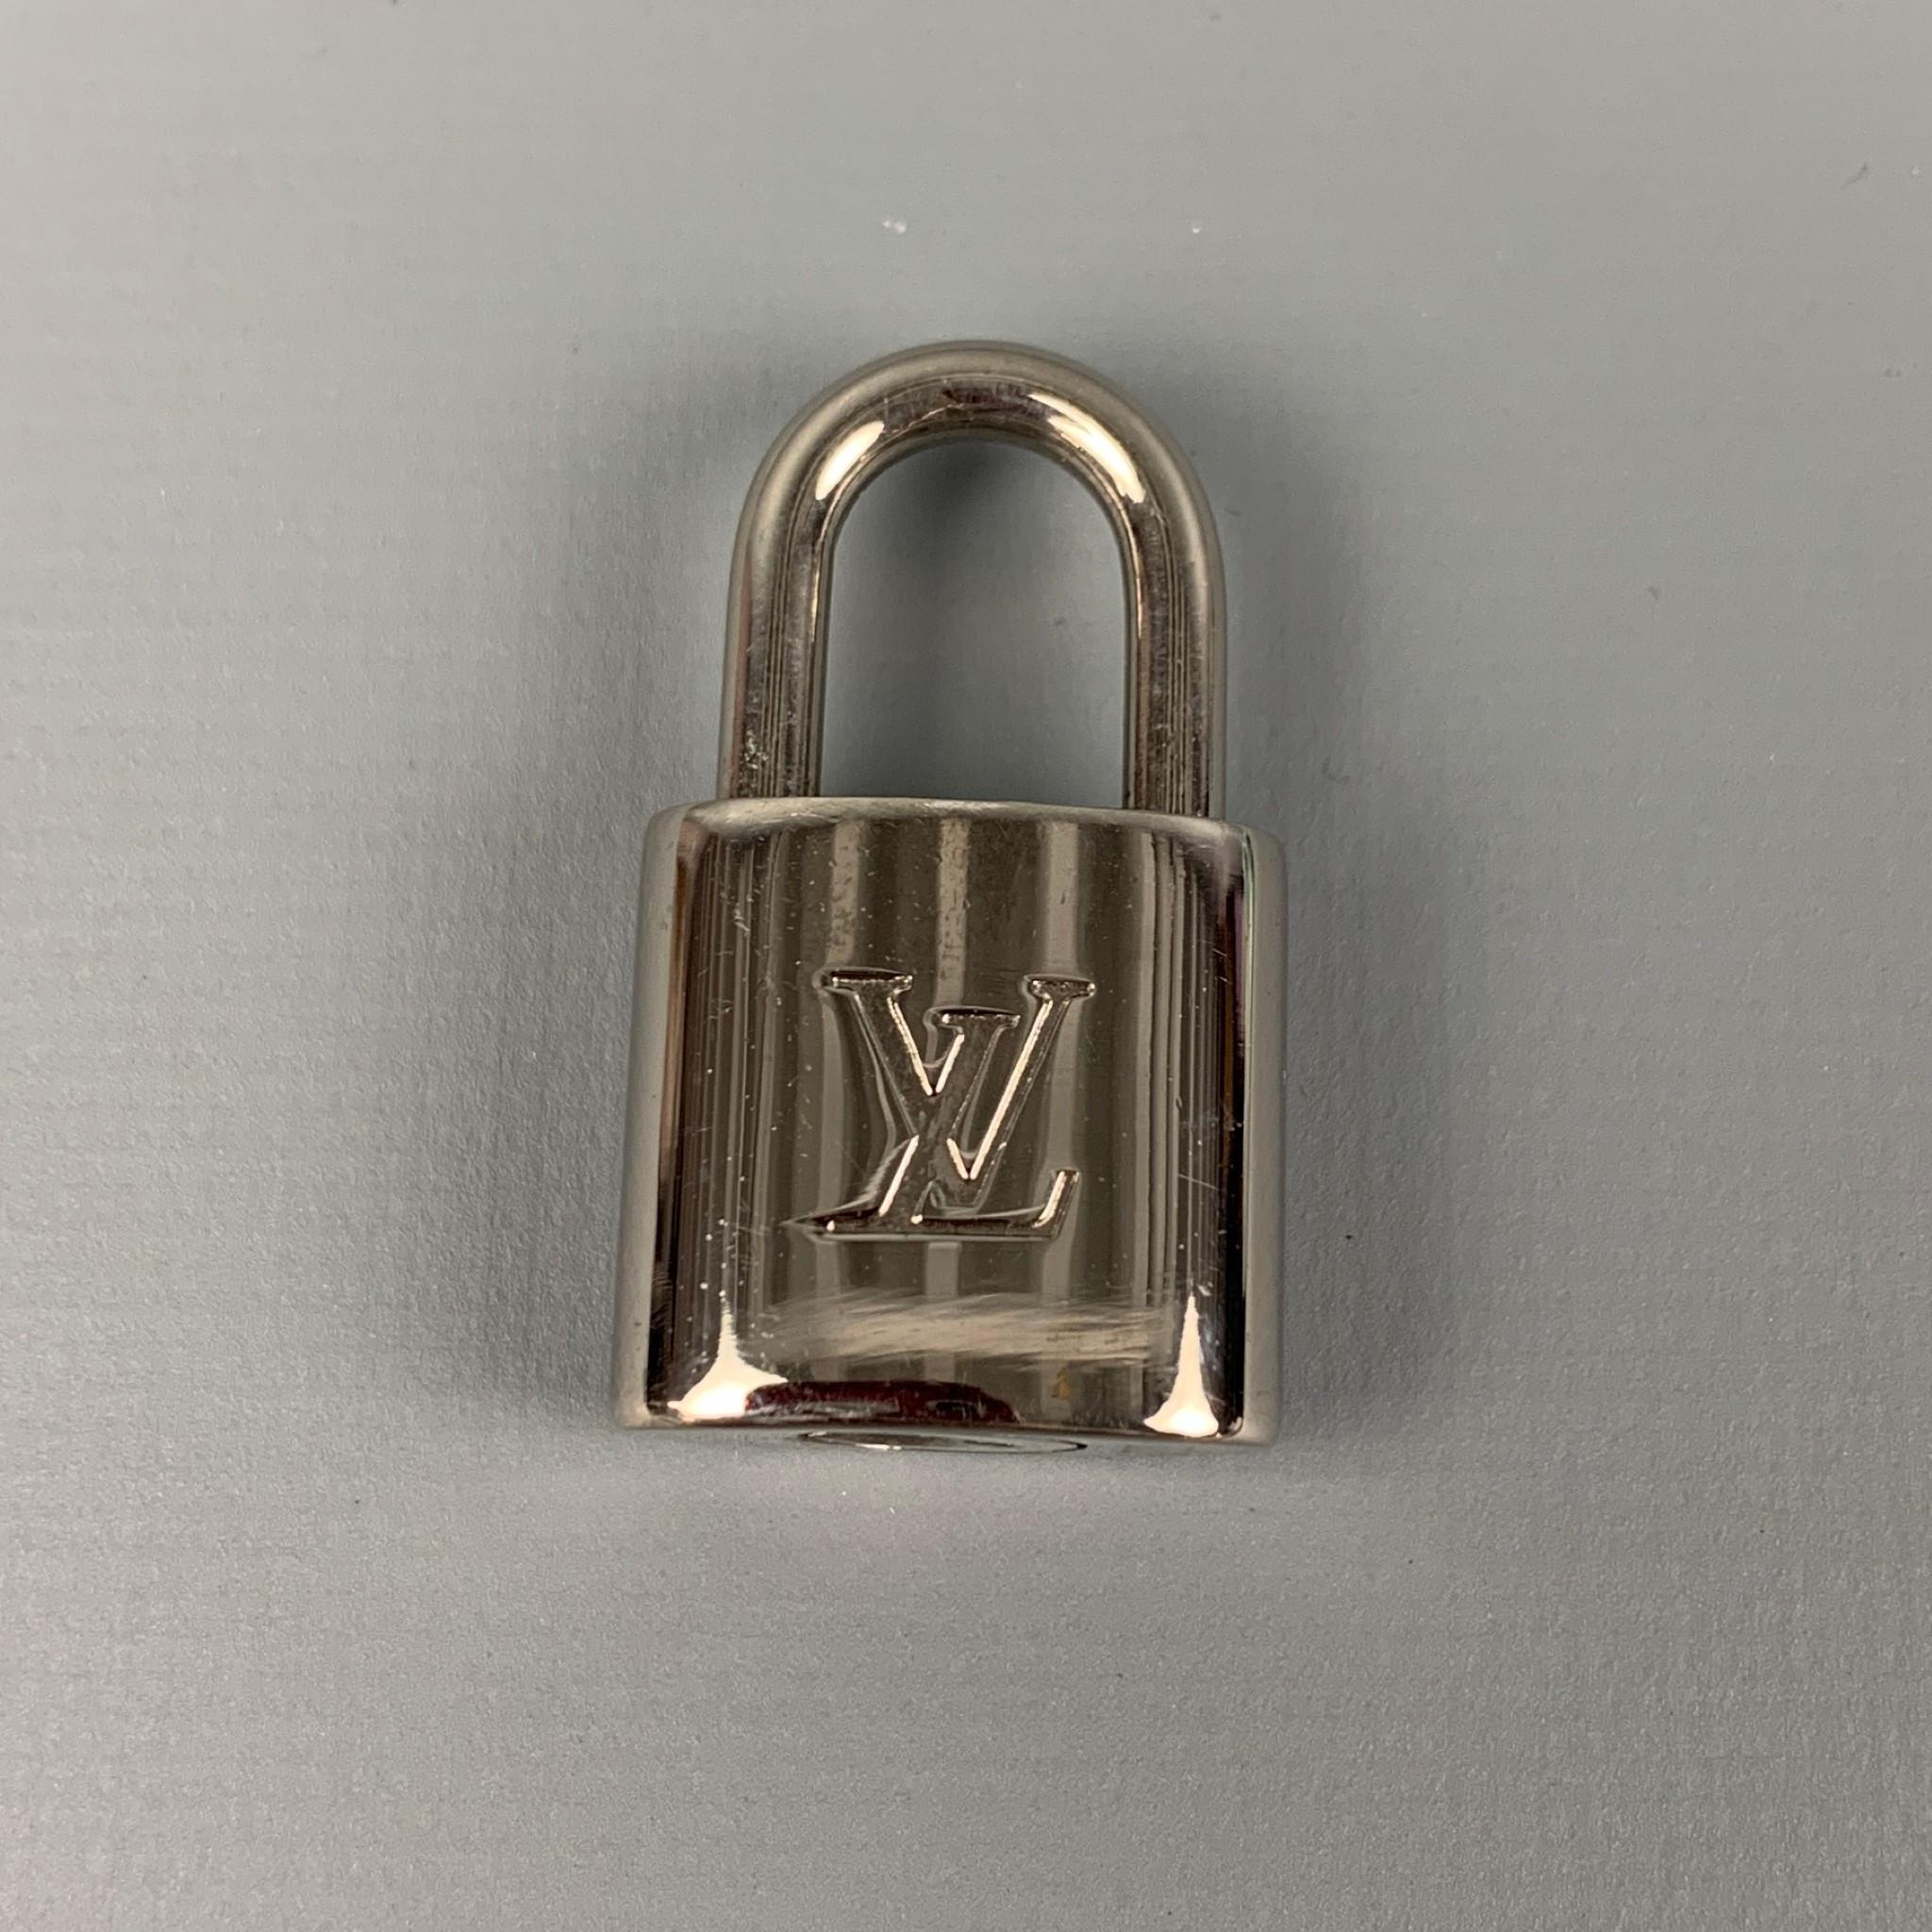 LOUIS VUITTON '303' padlock & key comes in silver tone metal featuring a engraved logo design. Includes box. 

Very Good Pre-Owned Condition.
Marked: 303

Measurement:

Length: 0.75 in.
Height: 1.5 in. 